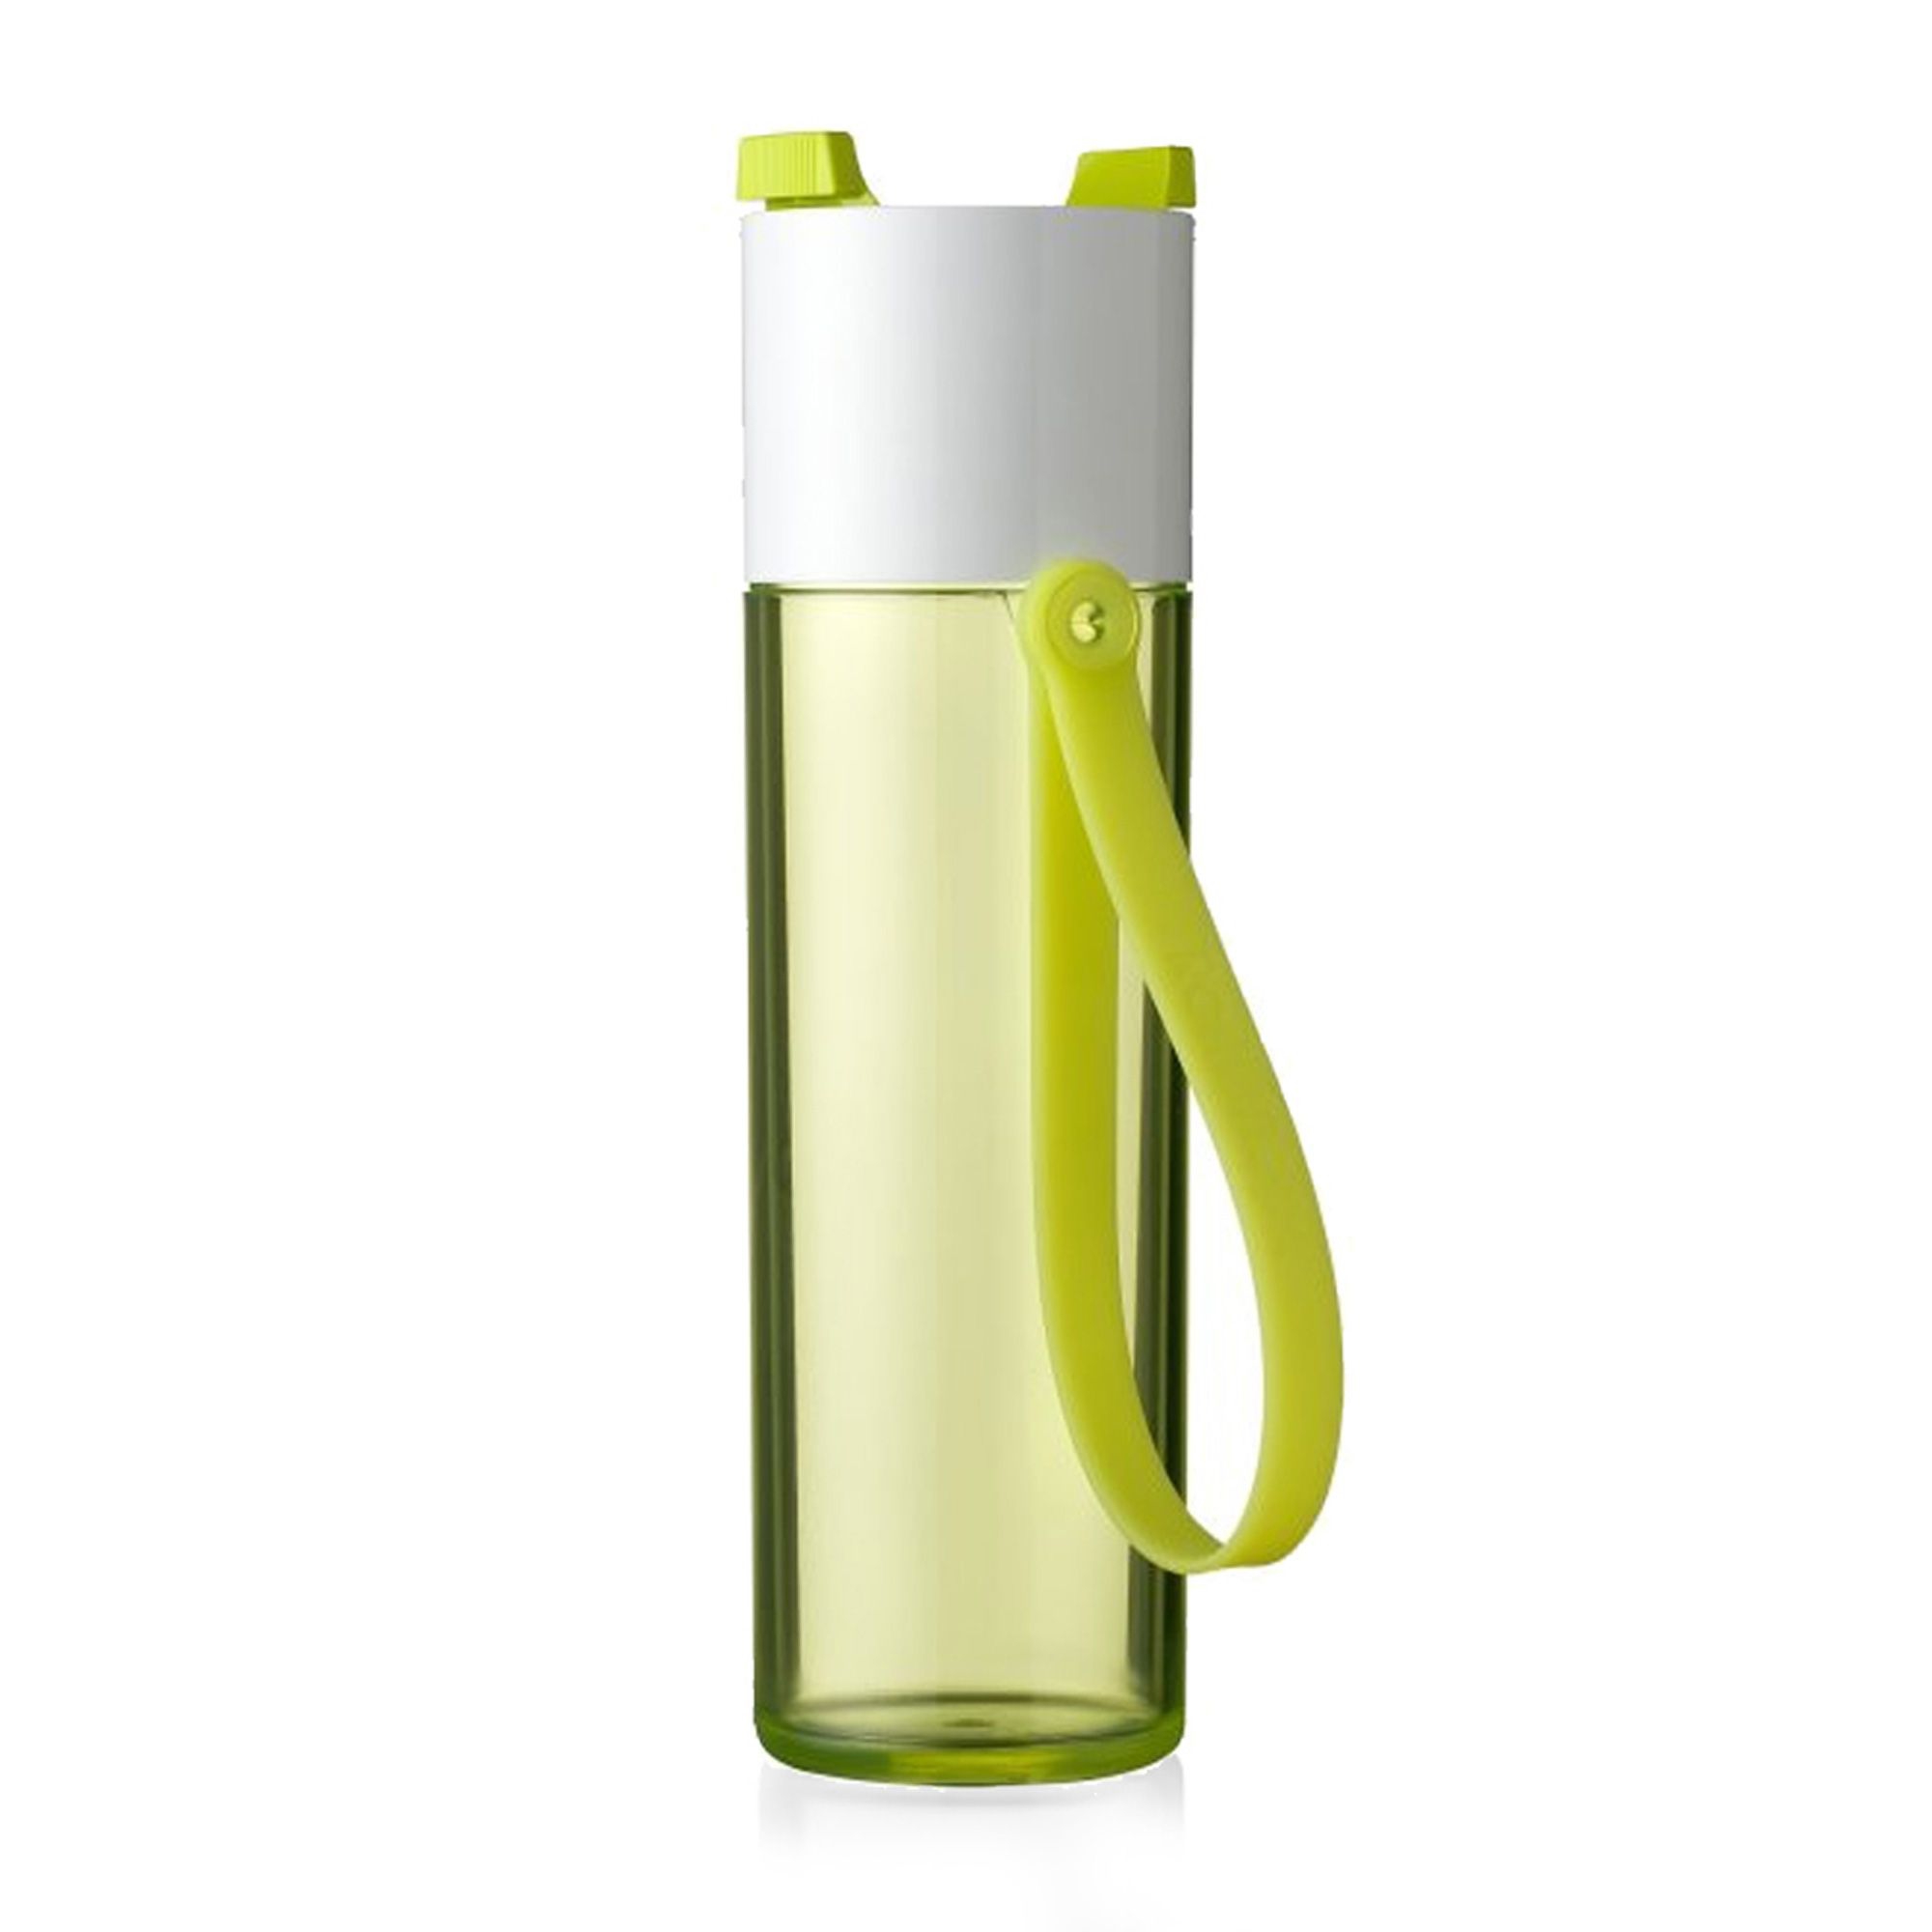 Mepal - Justwater waterbottle - different colors